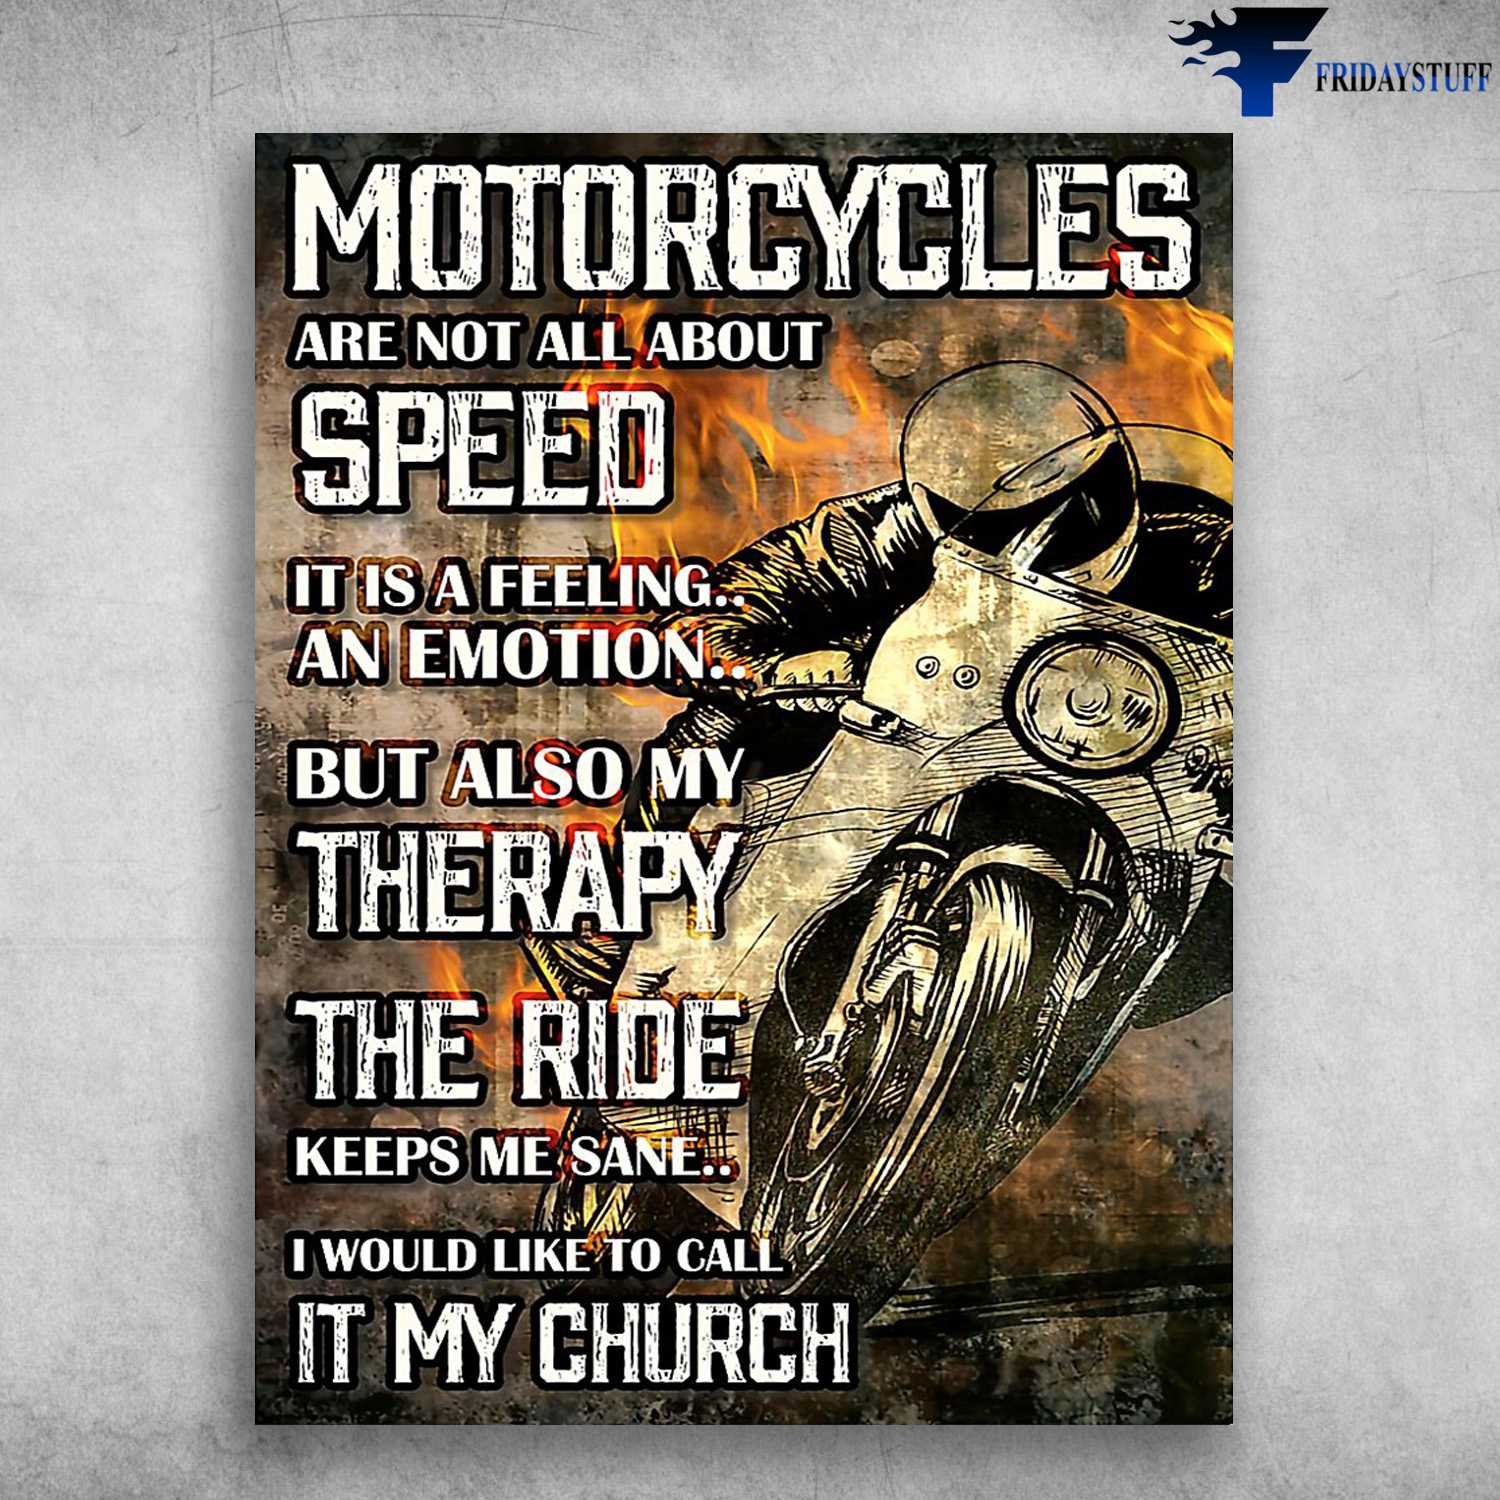 Motorbike Lover, Biker Poster - Motorcycles Are Not All Bout Speed, It Is A Feeling An Emotion, But Also My Therapy, The Ride Keeps My Sane, I Would Like To Call It My Church